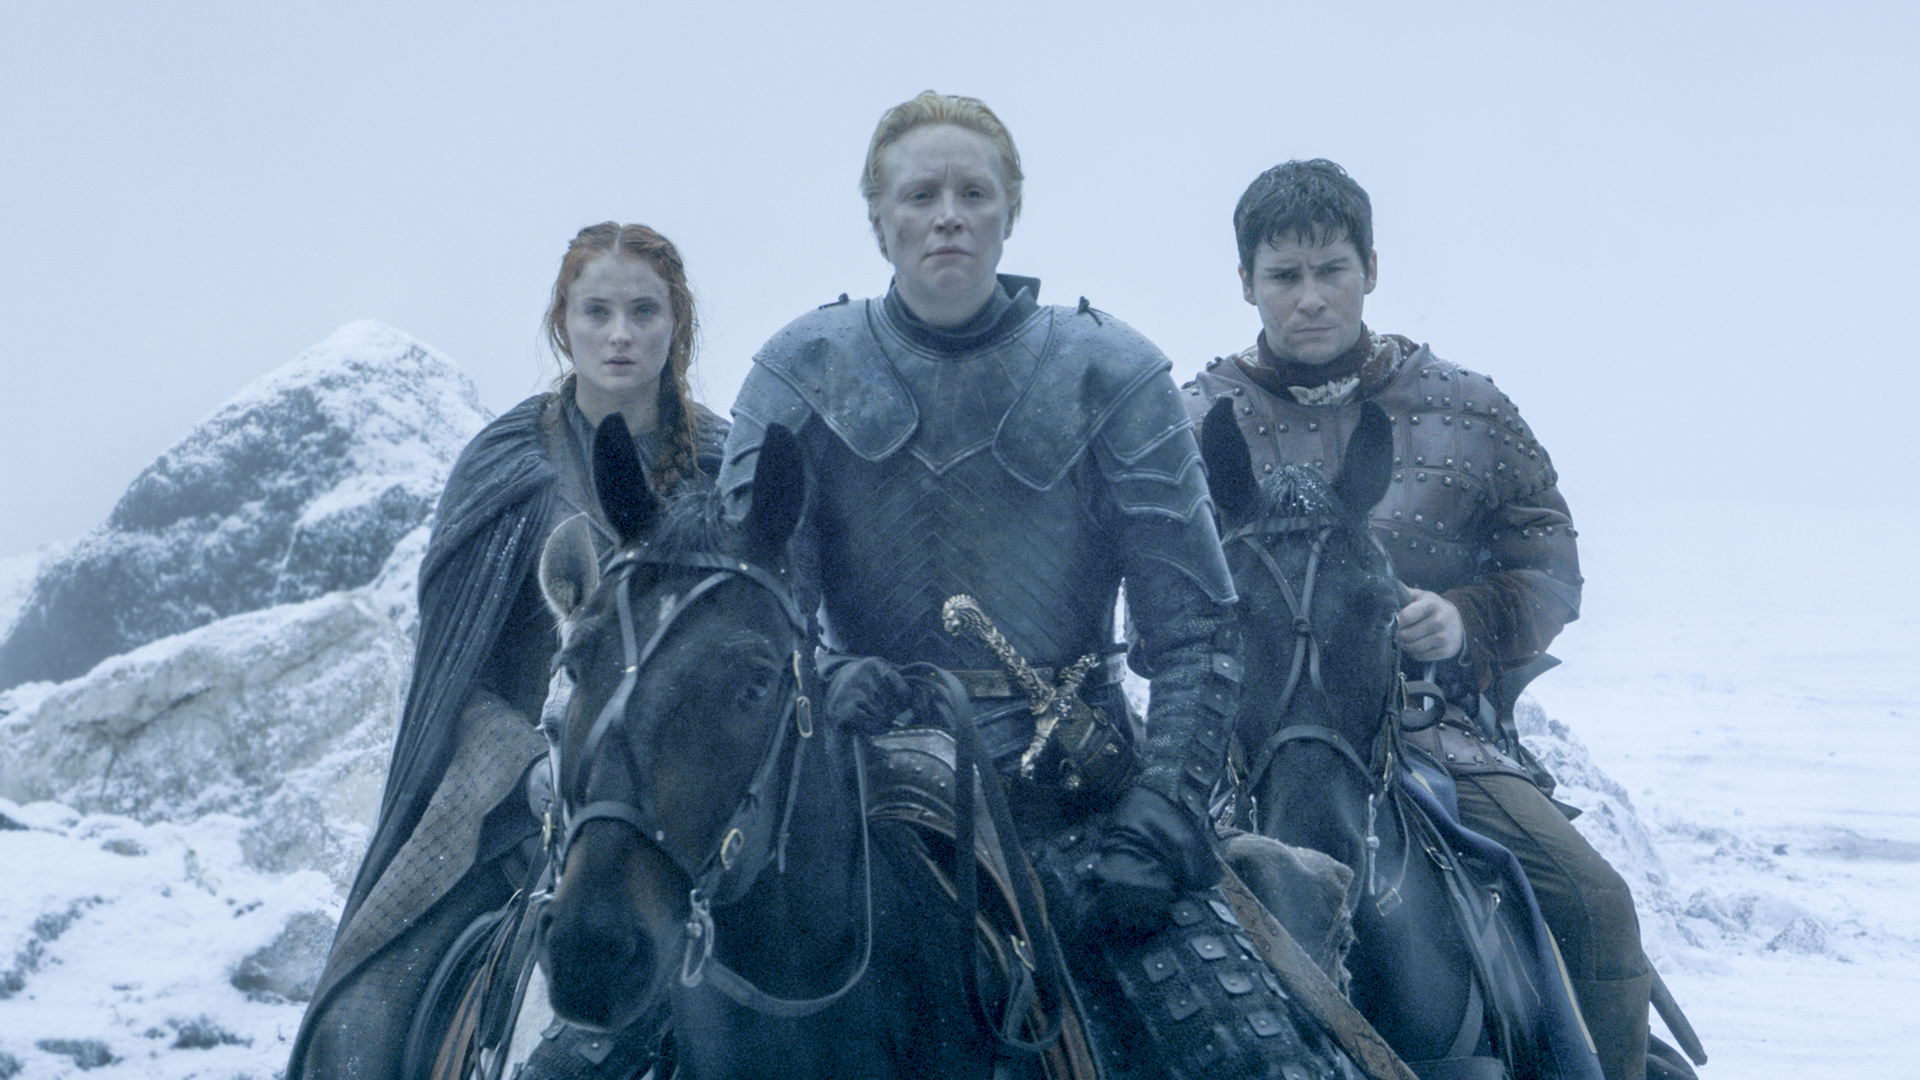 Gwendoline Christie as Brienne of Tarth in HBO's <em>Game of Thrones</em> (HBO)